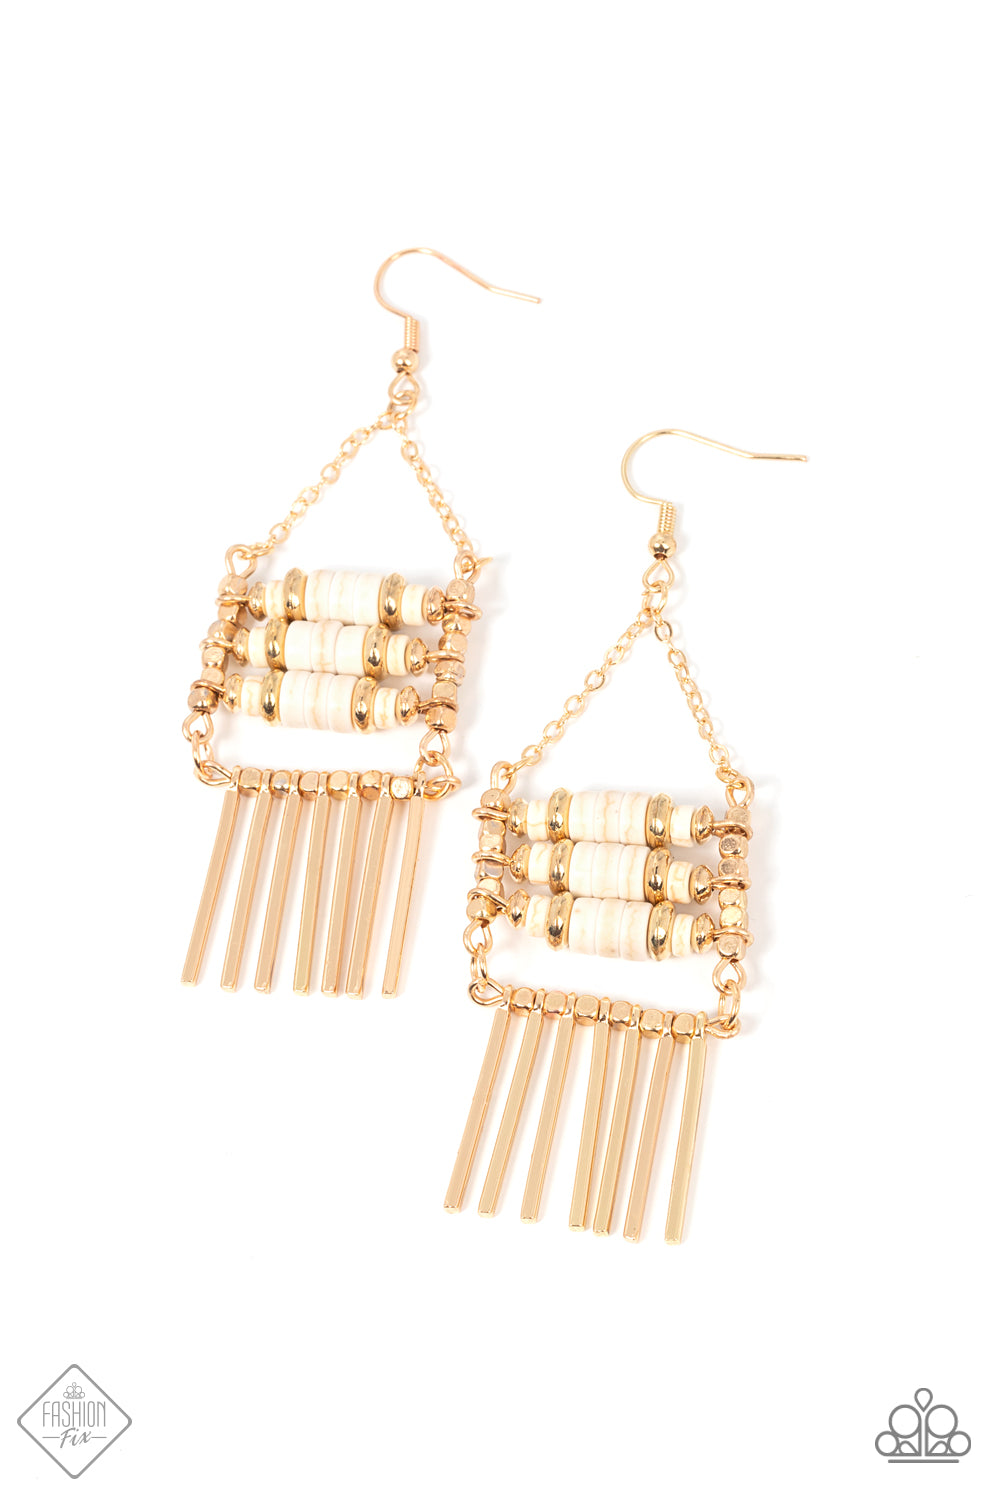 Paparazzi Tribal Tapestry Gold Fishhook Earrings - Fashion Fix Sunset Sightings March 2022 - P5SE-GDXX-077HP